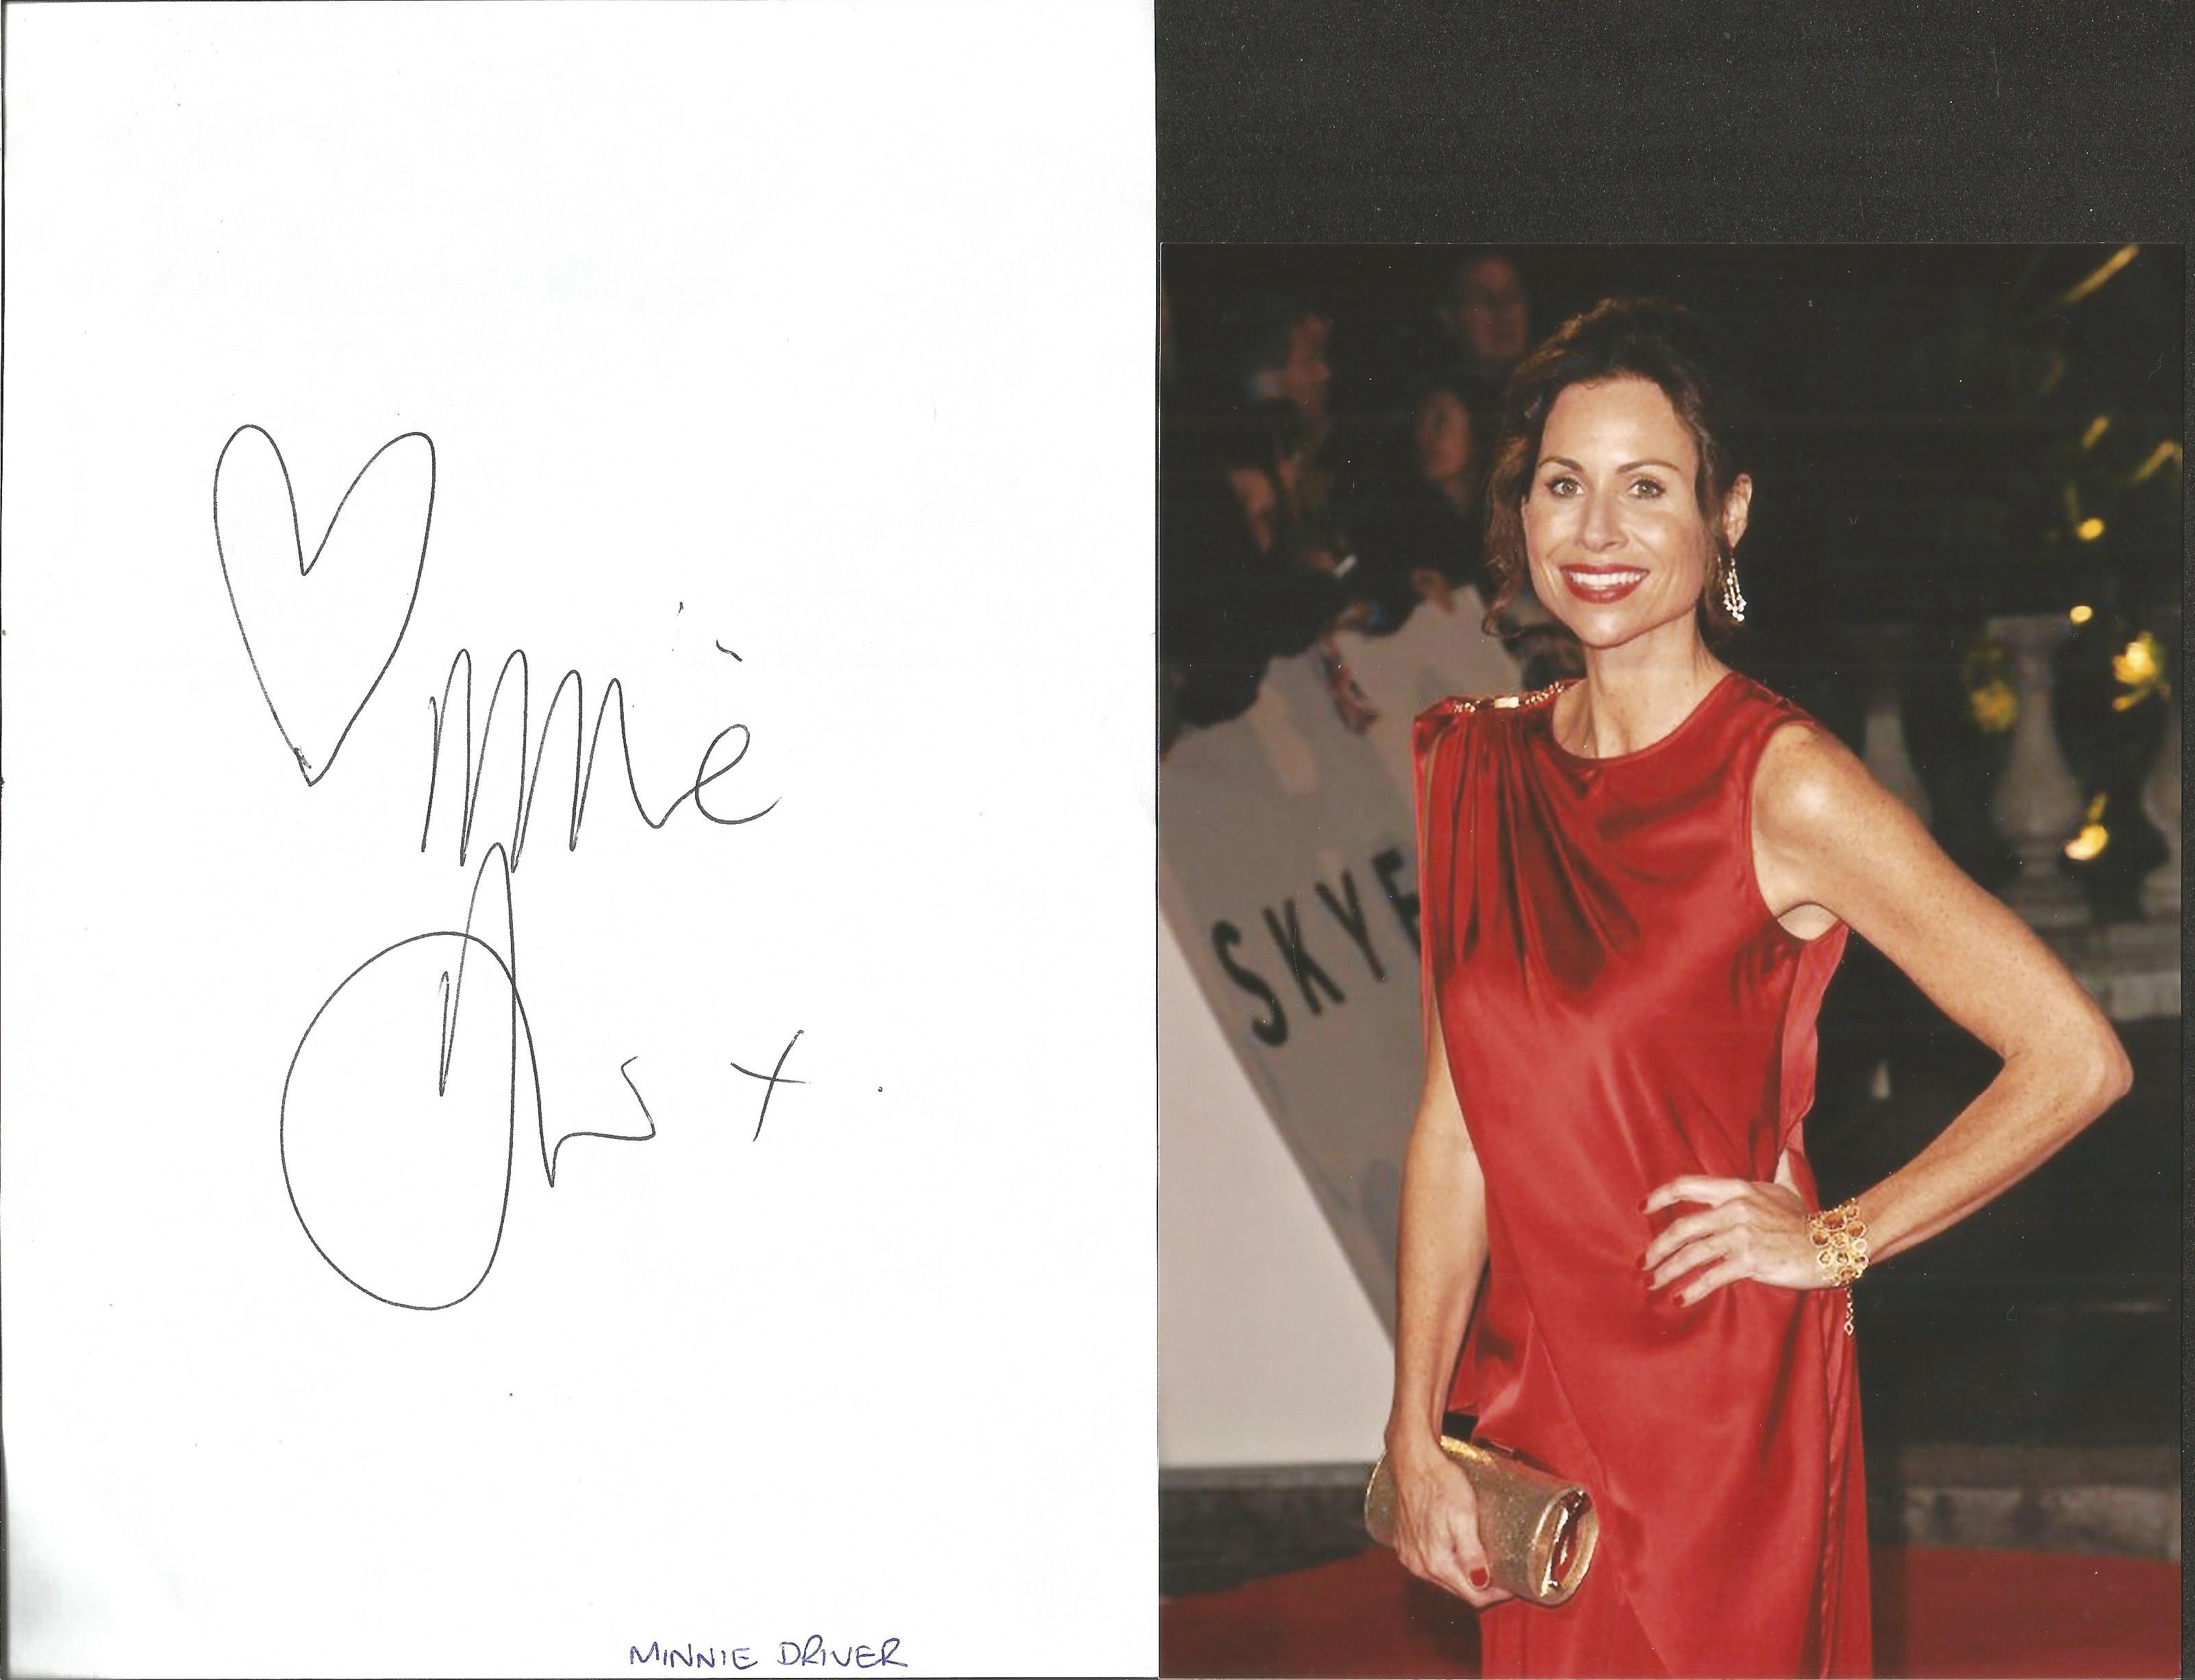 Minnie Driver signed large album page. Good condition. All autographs come with a Certificate of